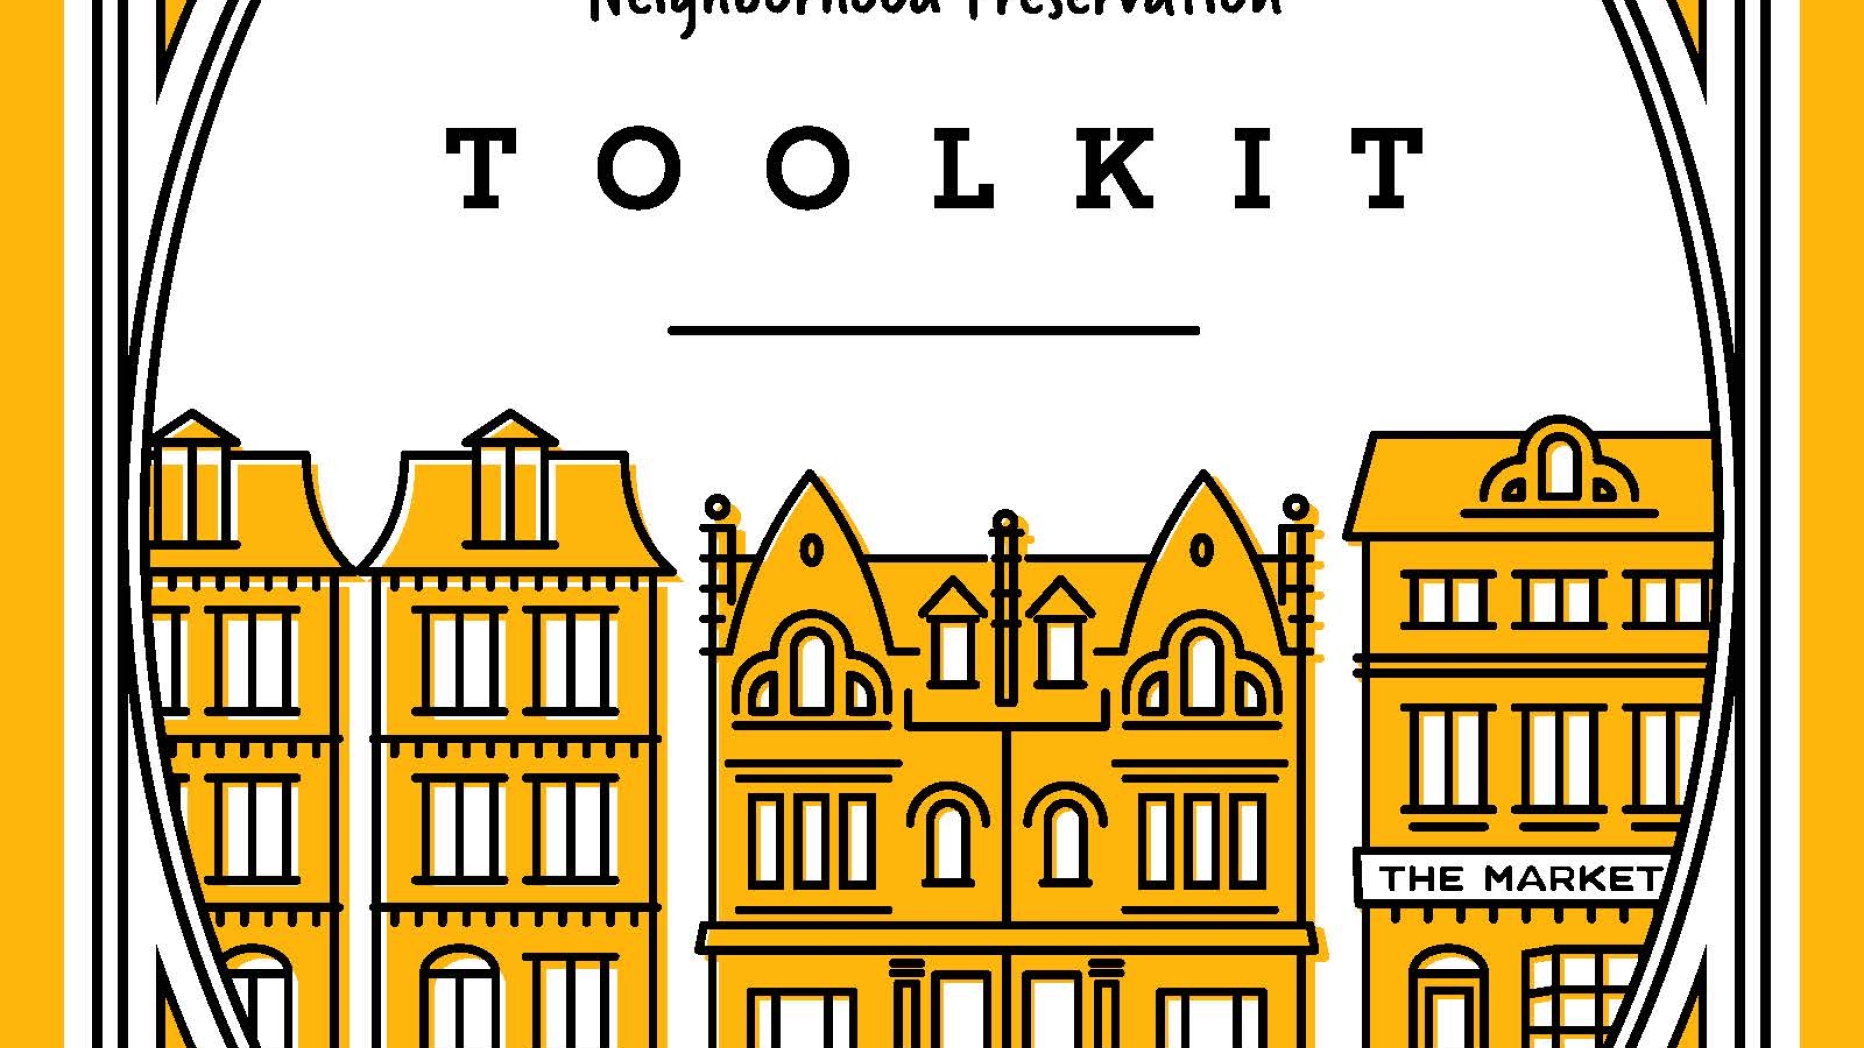 Toolkit front cover